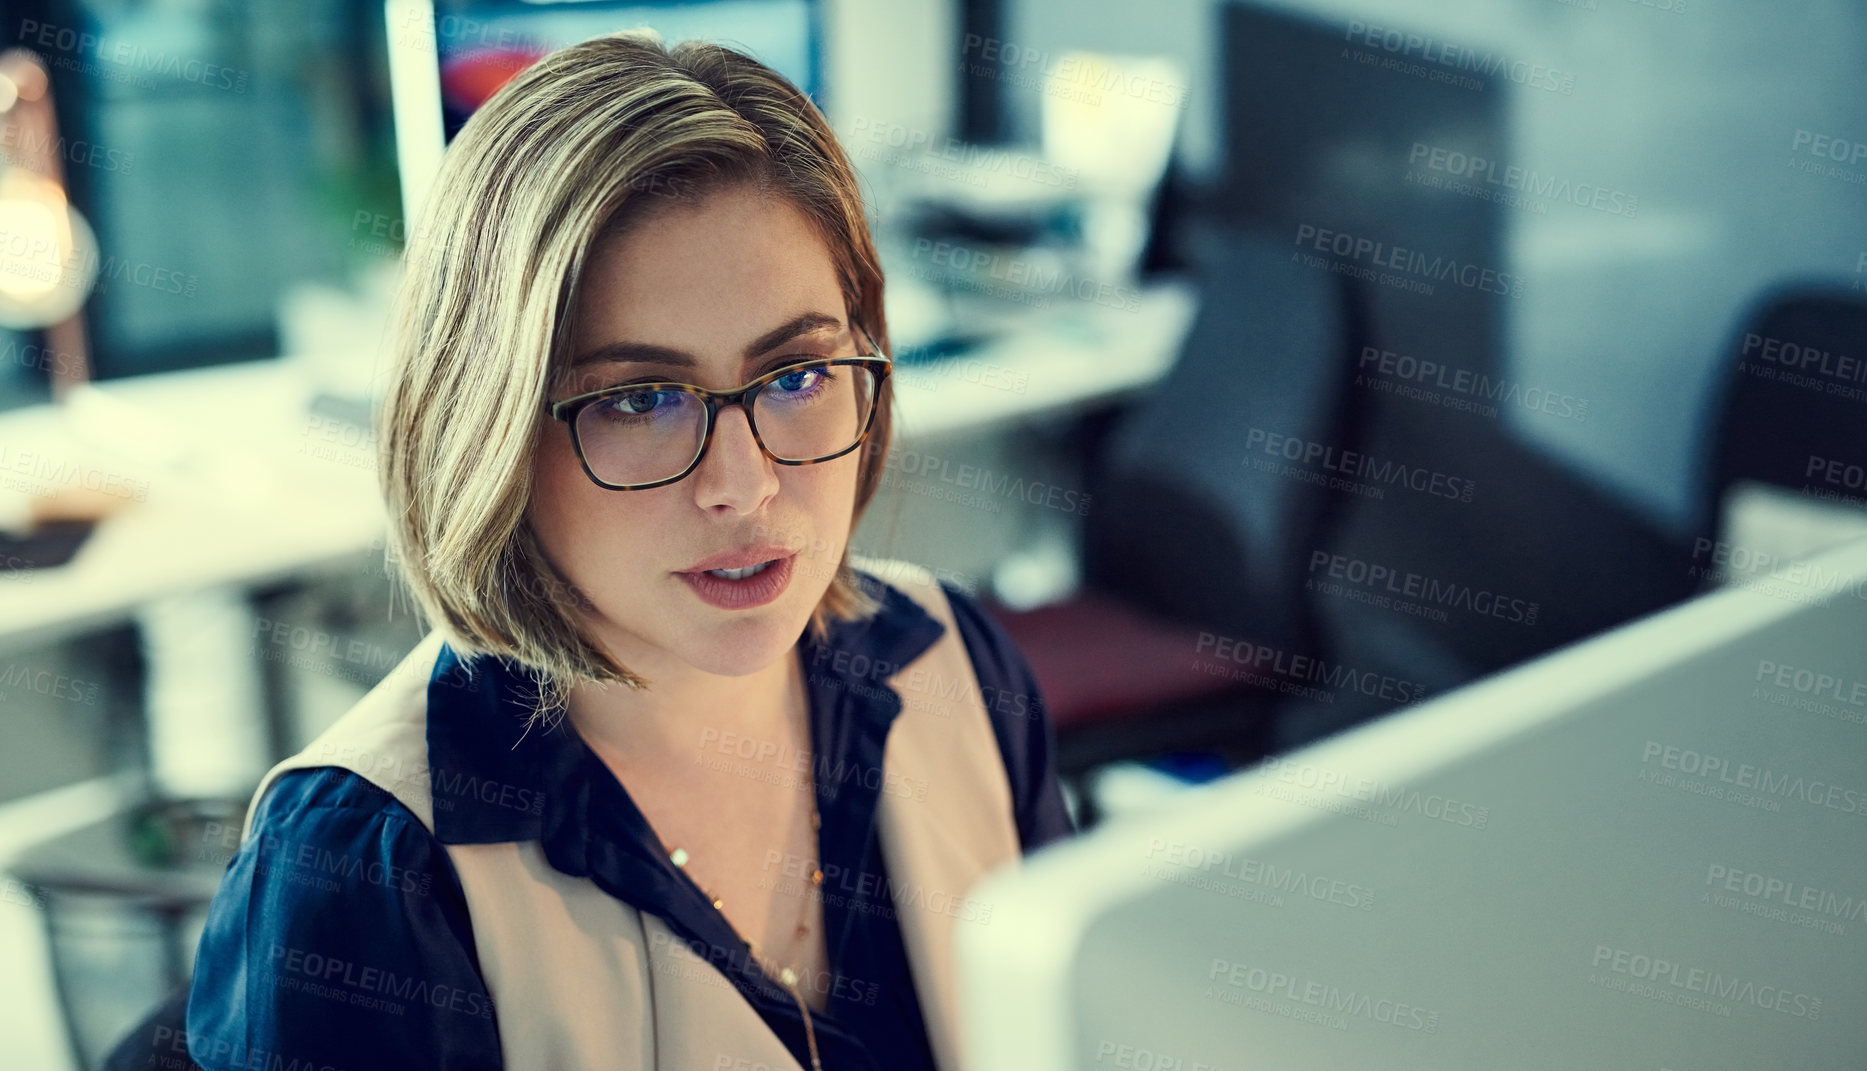 Buy stock photo Shot of a young businesswoman working late in an office